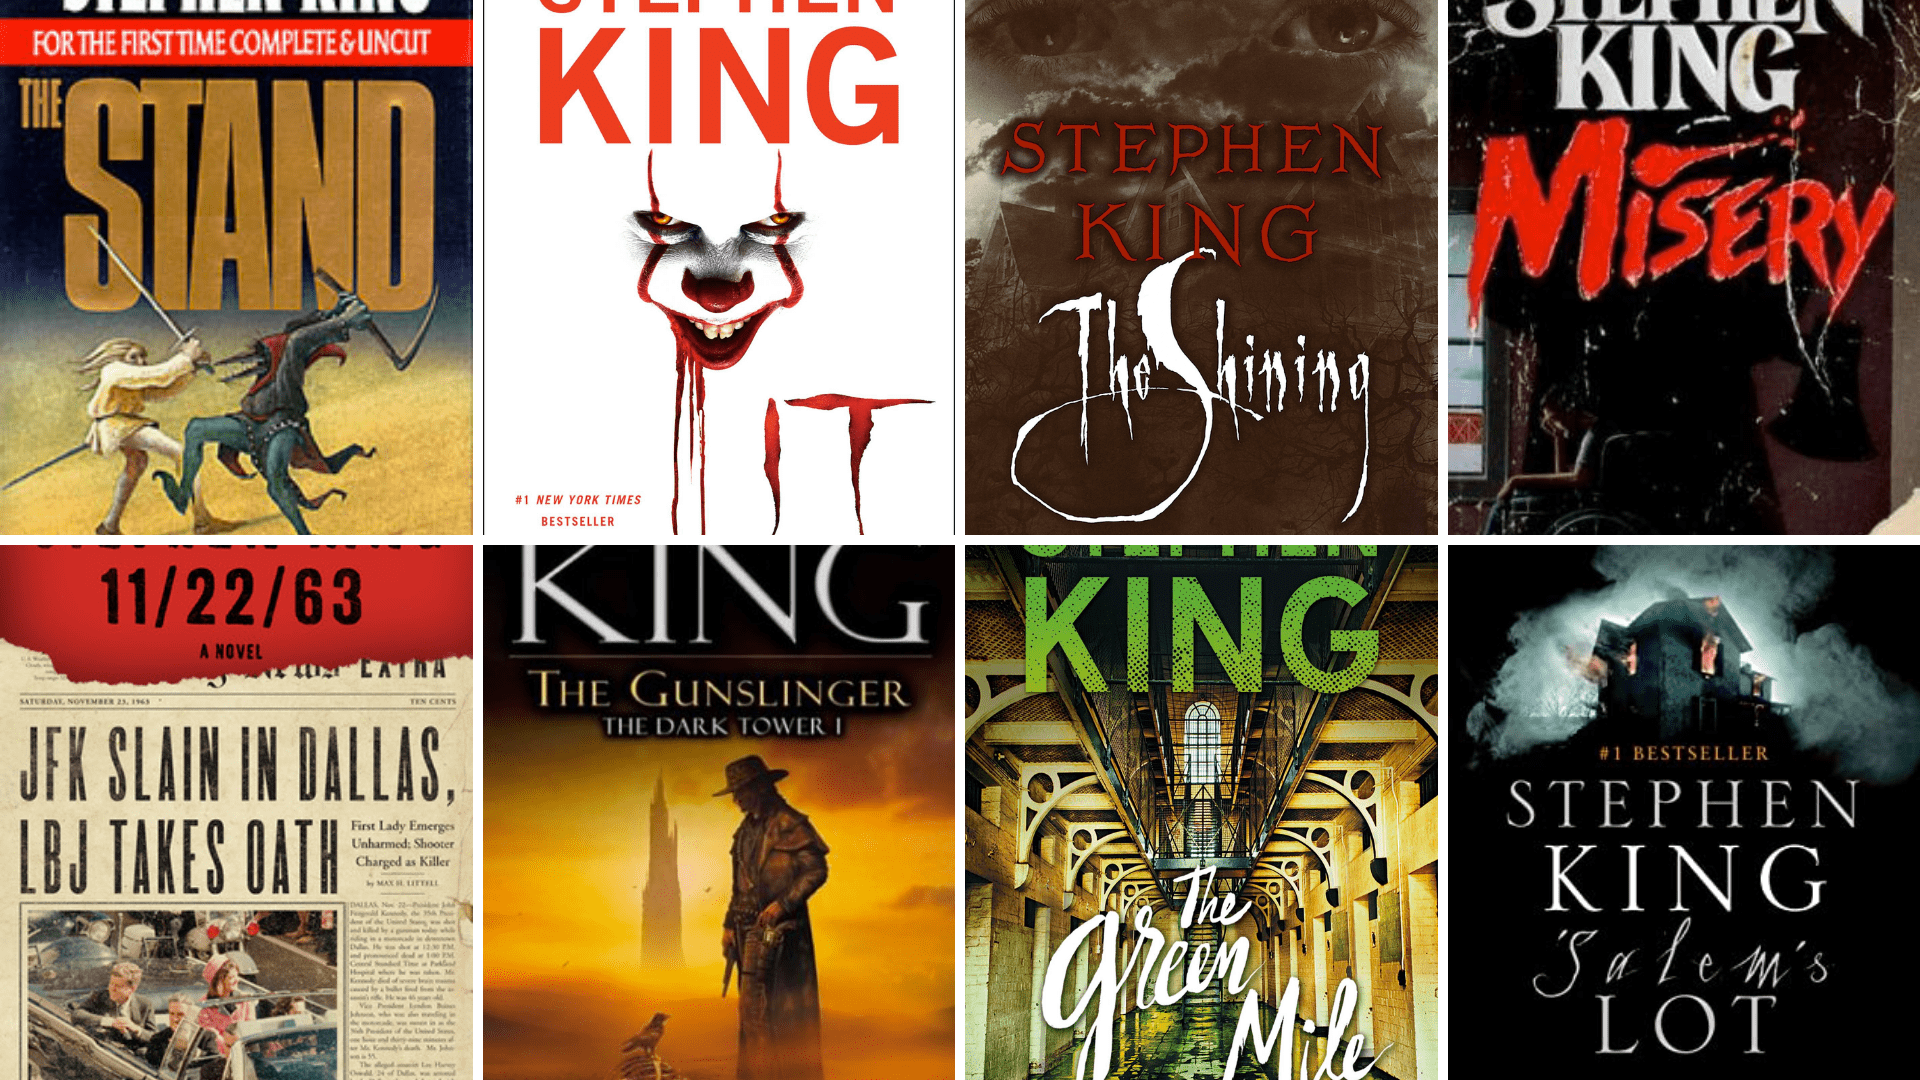 What is the most thought-provoking Stephen King book?